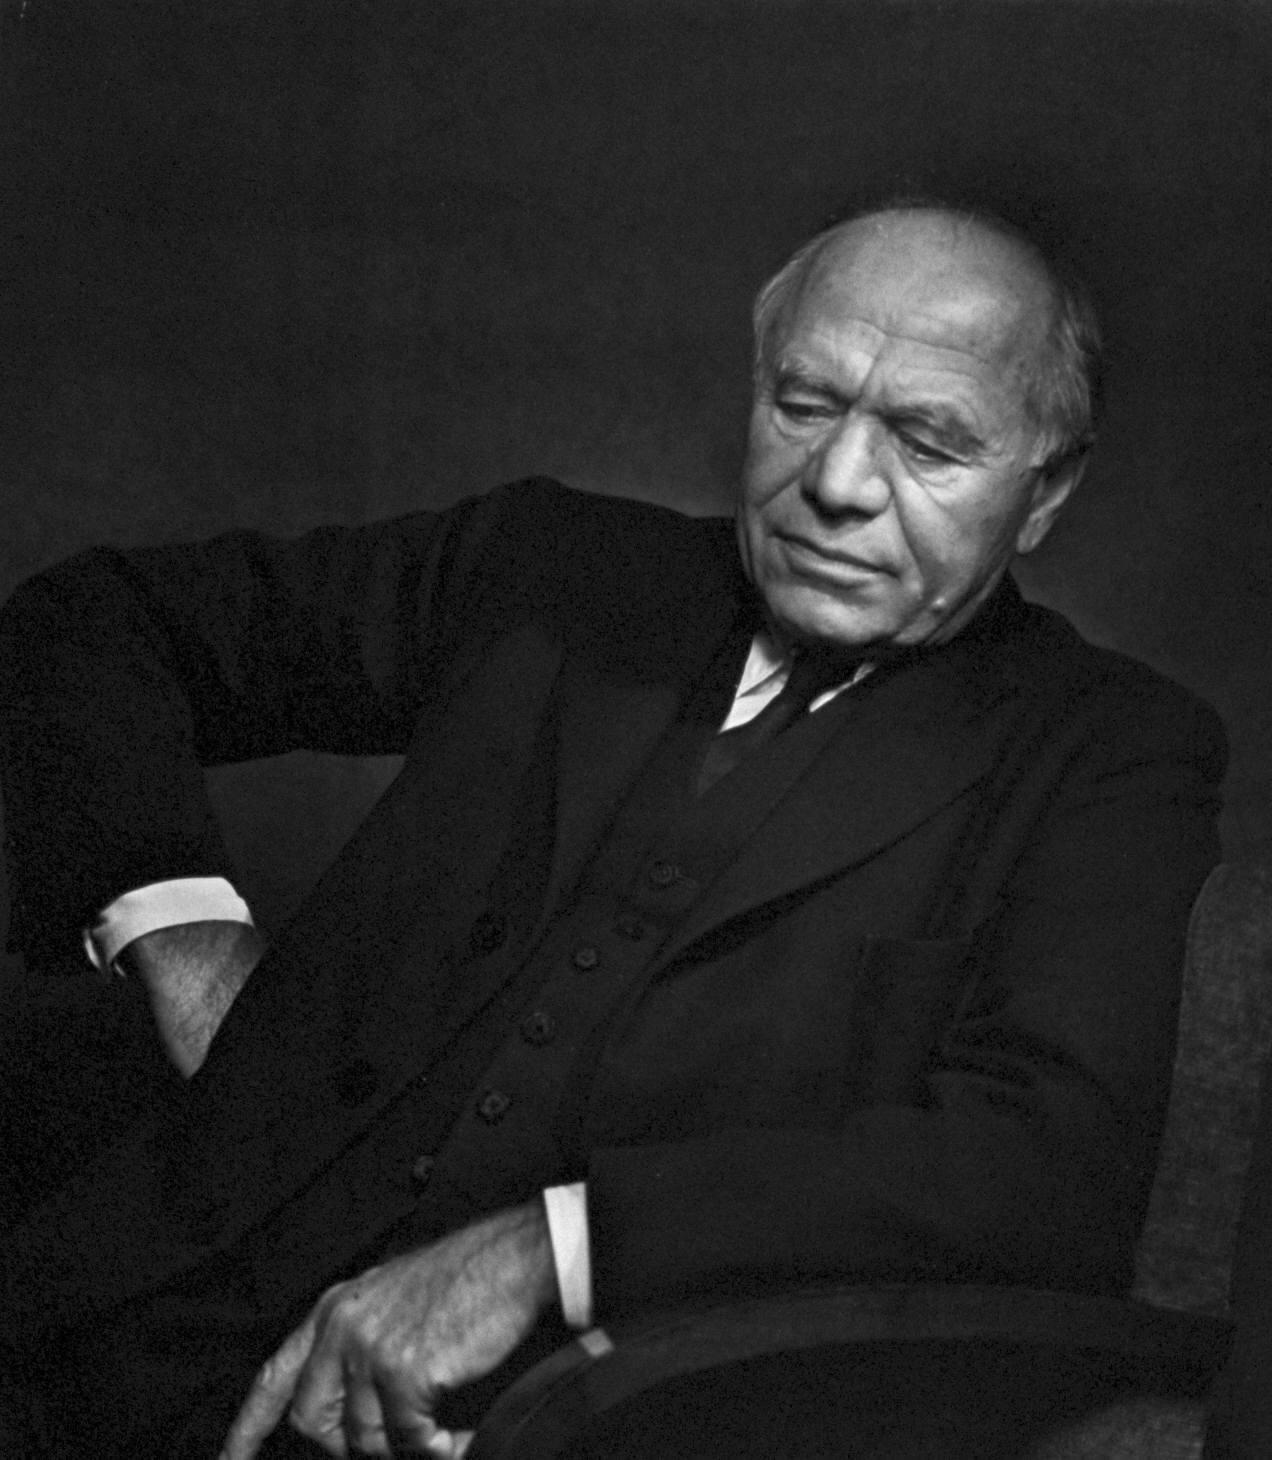 Lord Beaverbrook | Courtesy of the Yousuf Karsh Estate